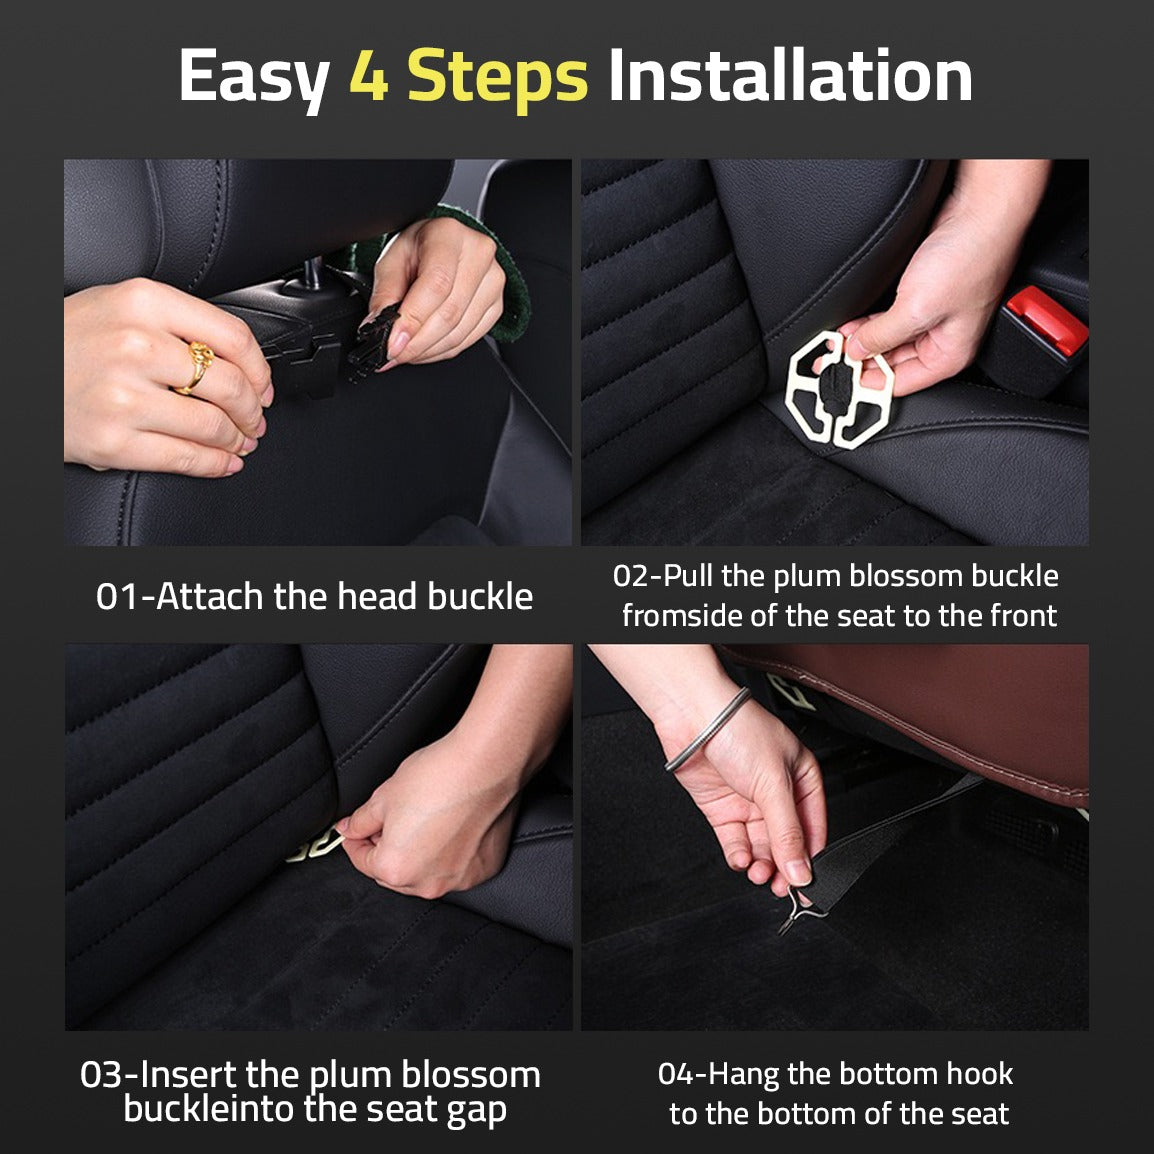 Image shows the 4 steps of installing Car Seat Back Organizer